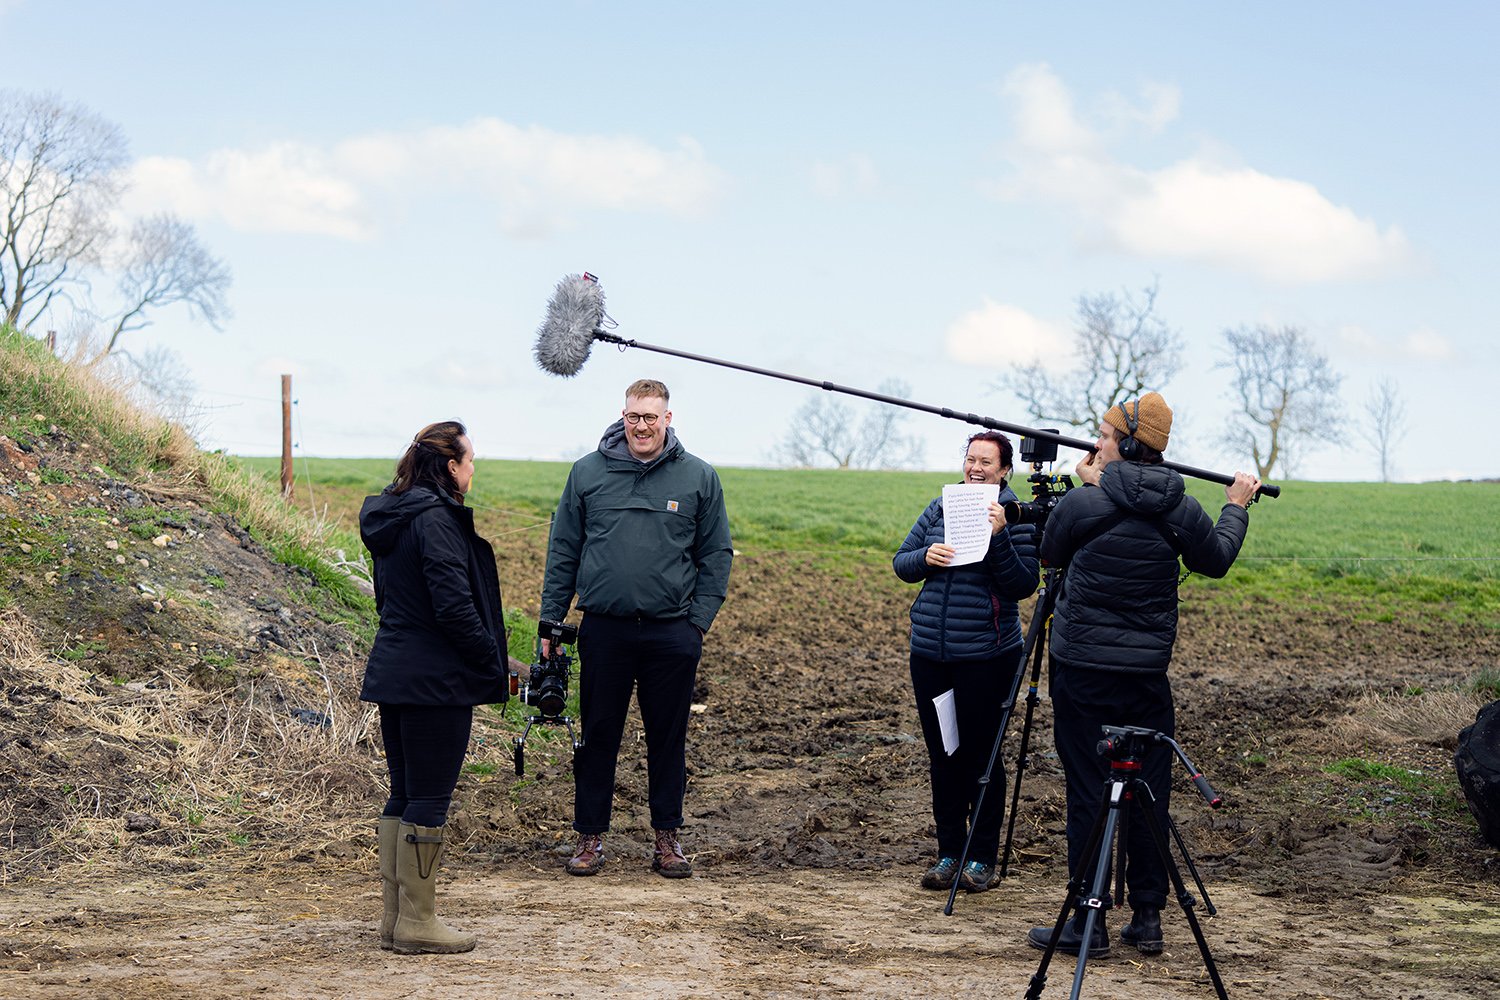 Hertfordshire Video Production from Neon Mango Production - Outdoors video shoot on a farm.jpg